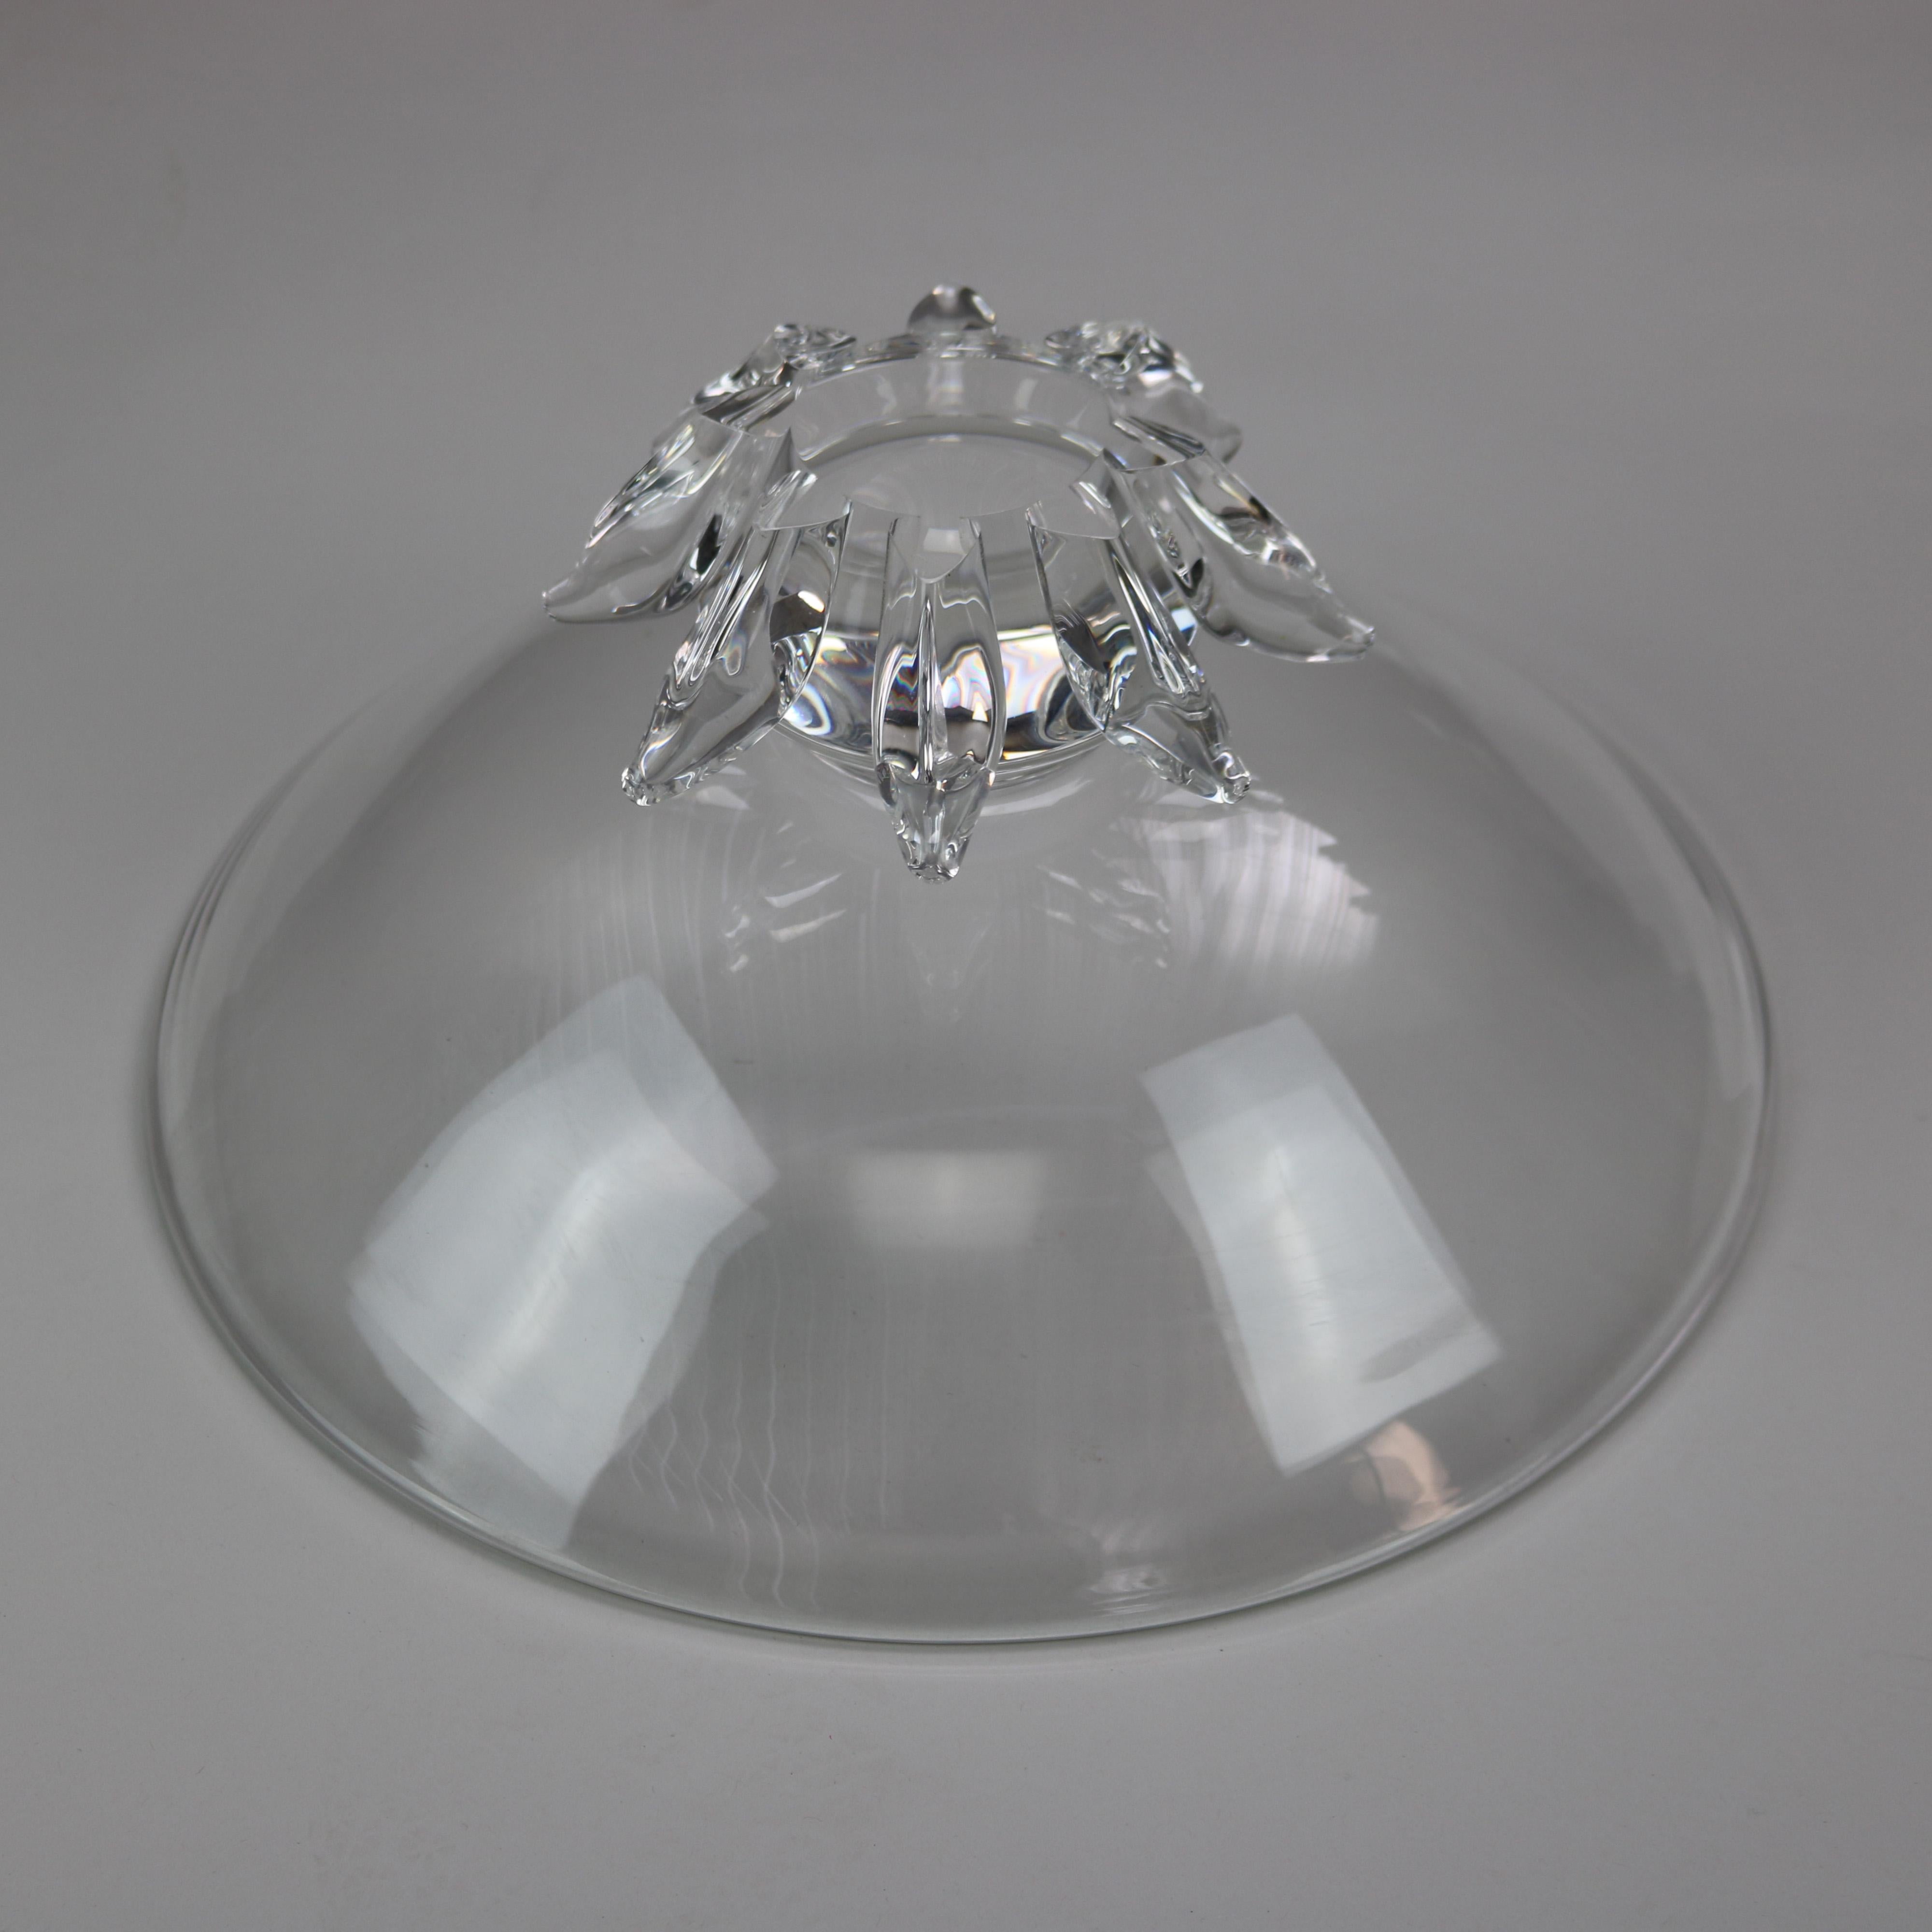 Large Mid-Century Modern Steuben Art Glass Footed Center Bowl, Signed, c1960 7